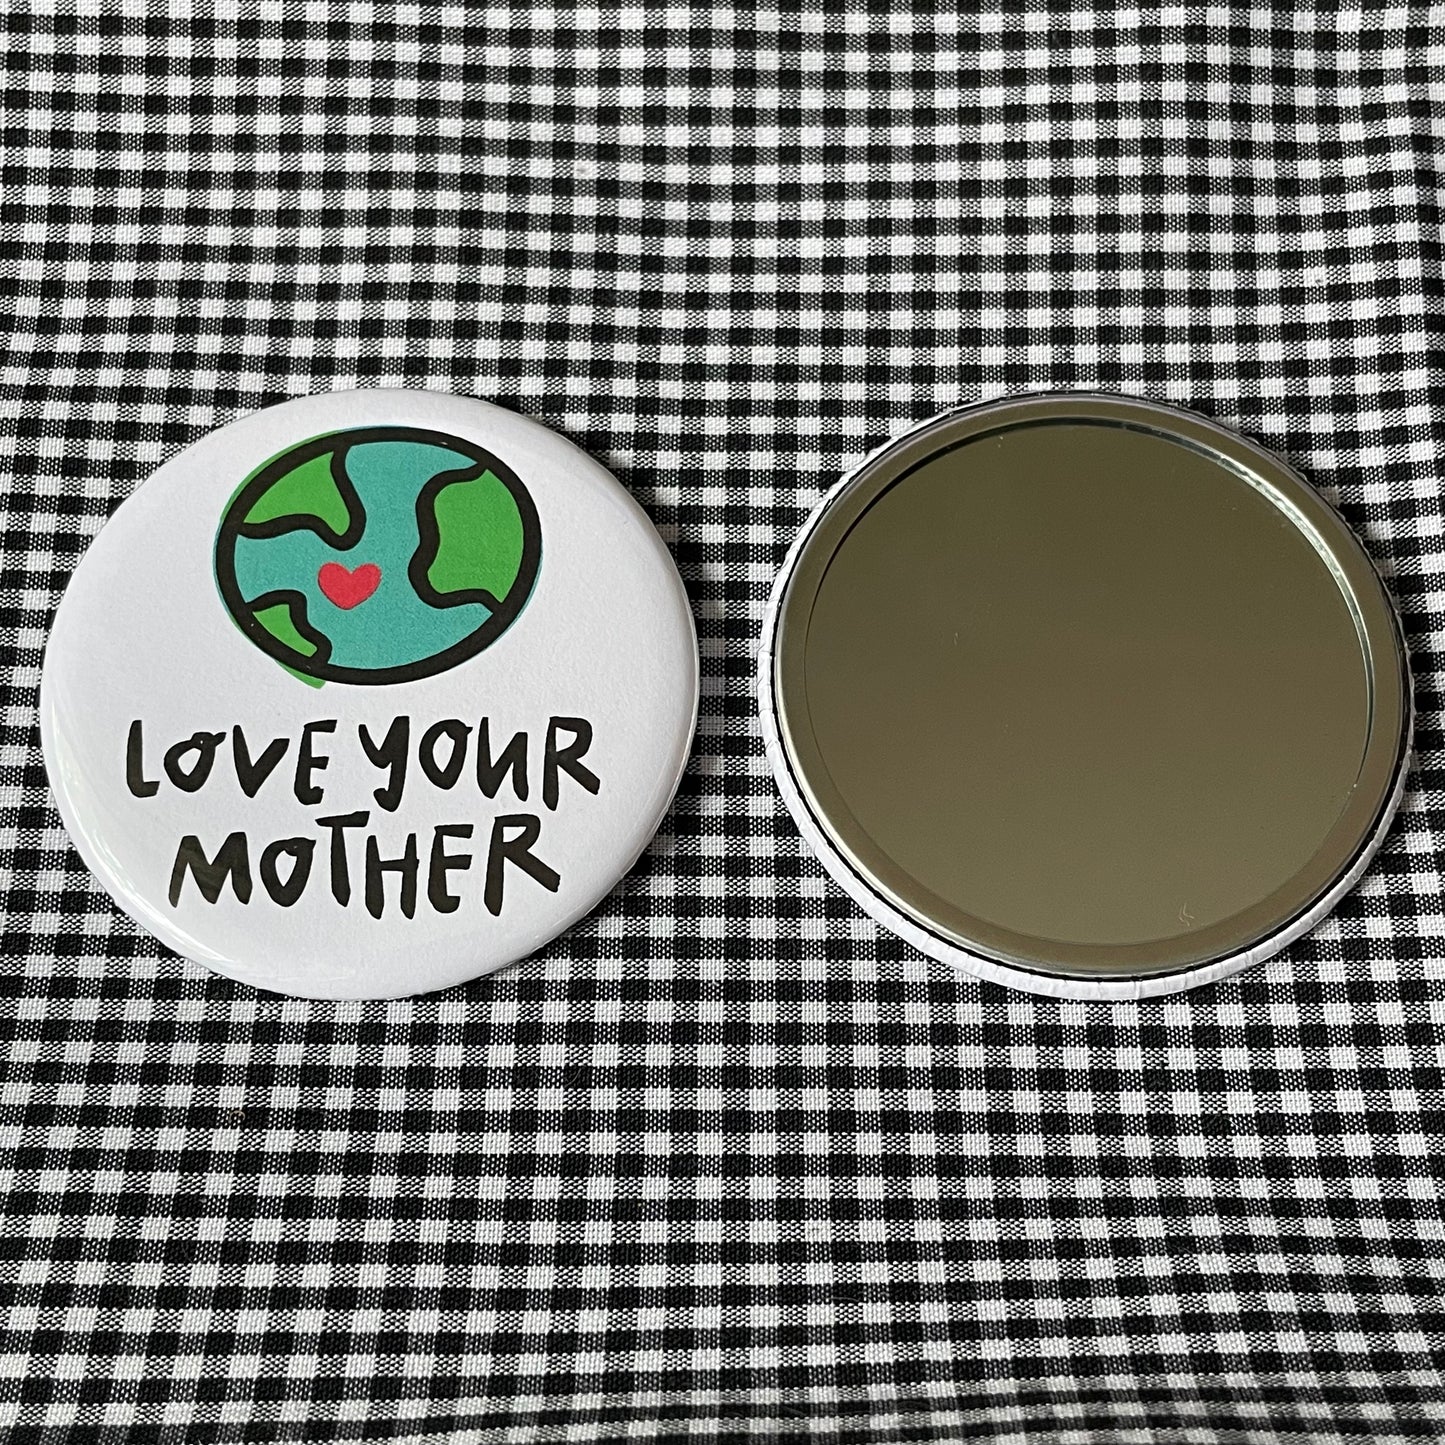 LOVE YOUR MOTHER PIN / MAGNET / MIRROR  2.25”